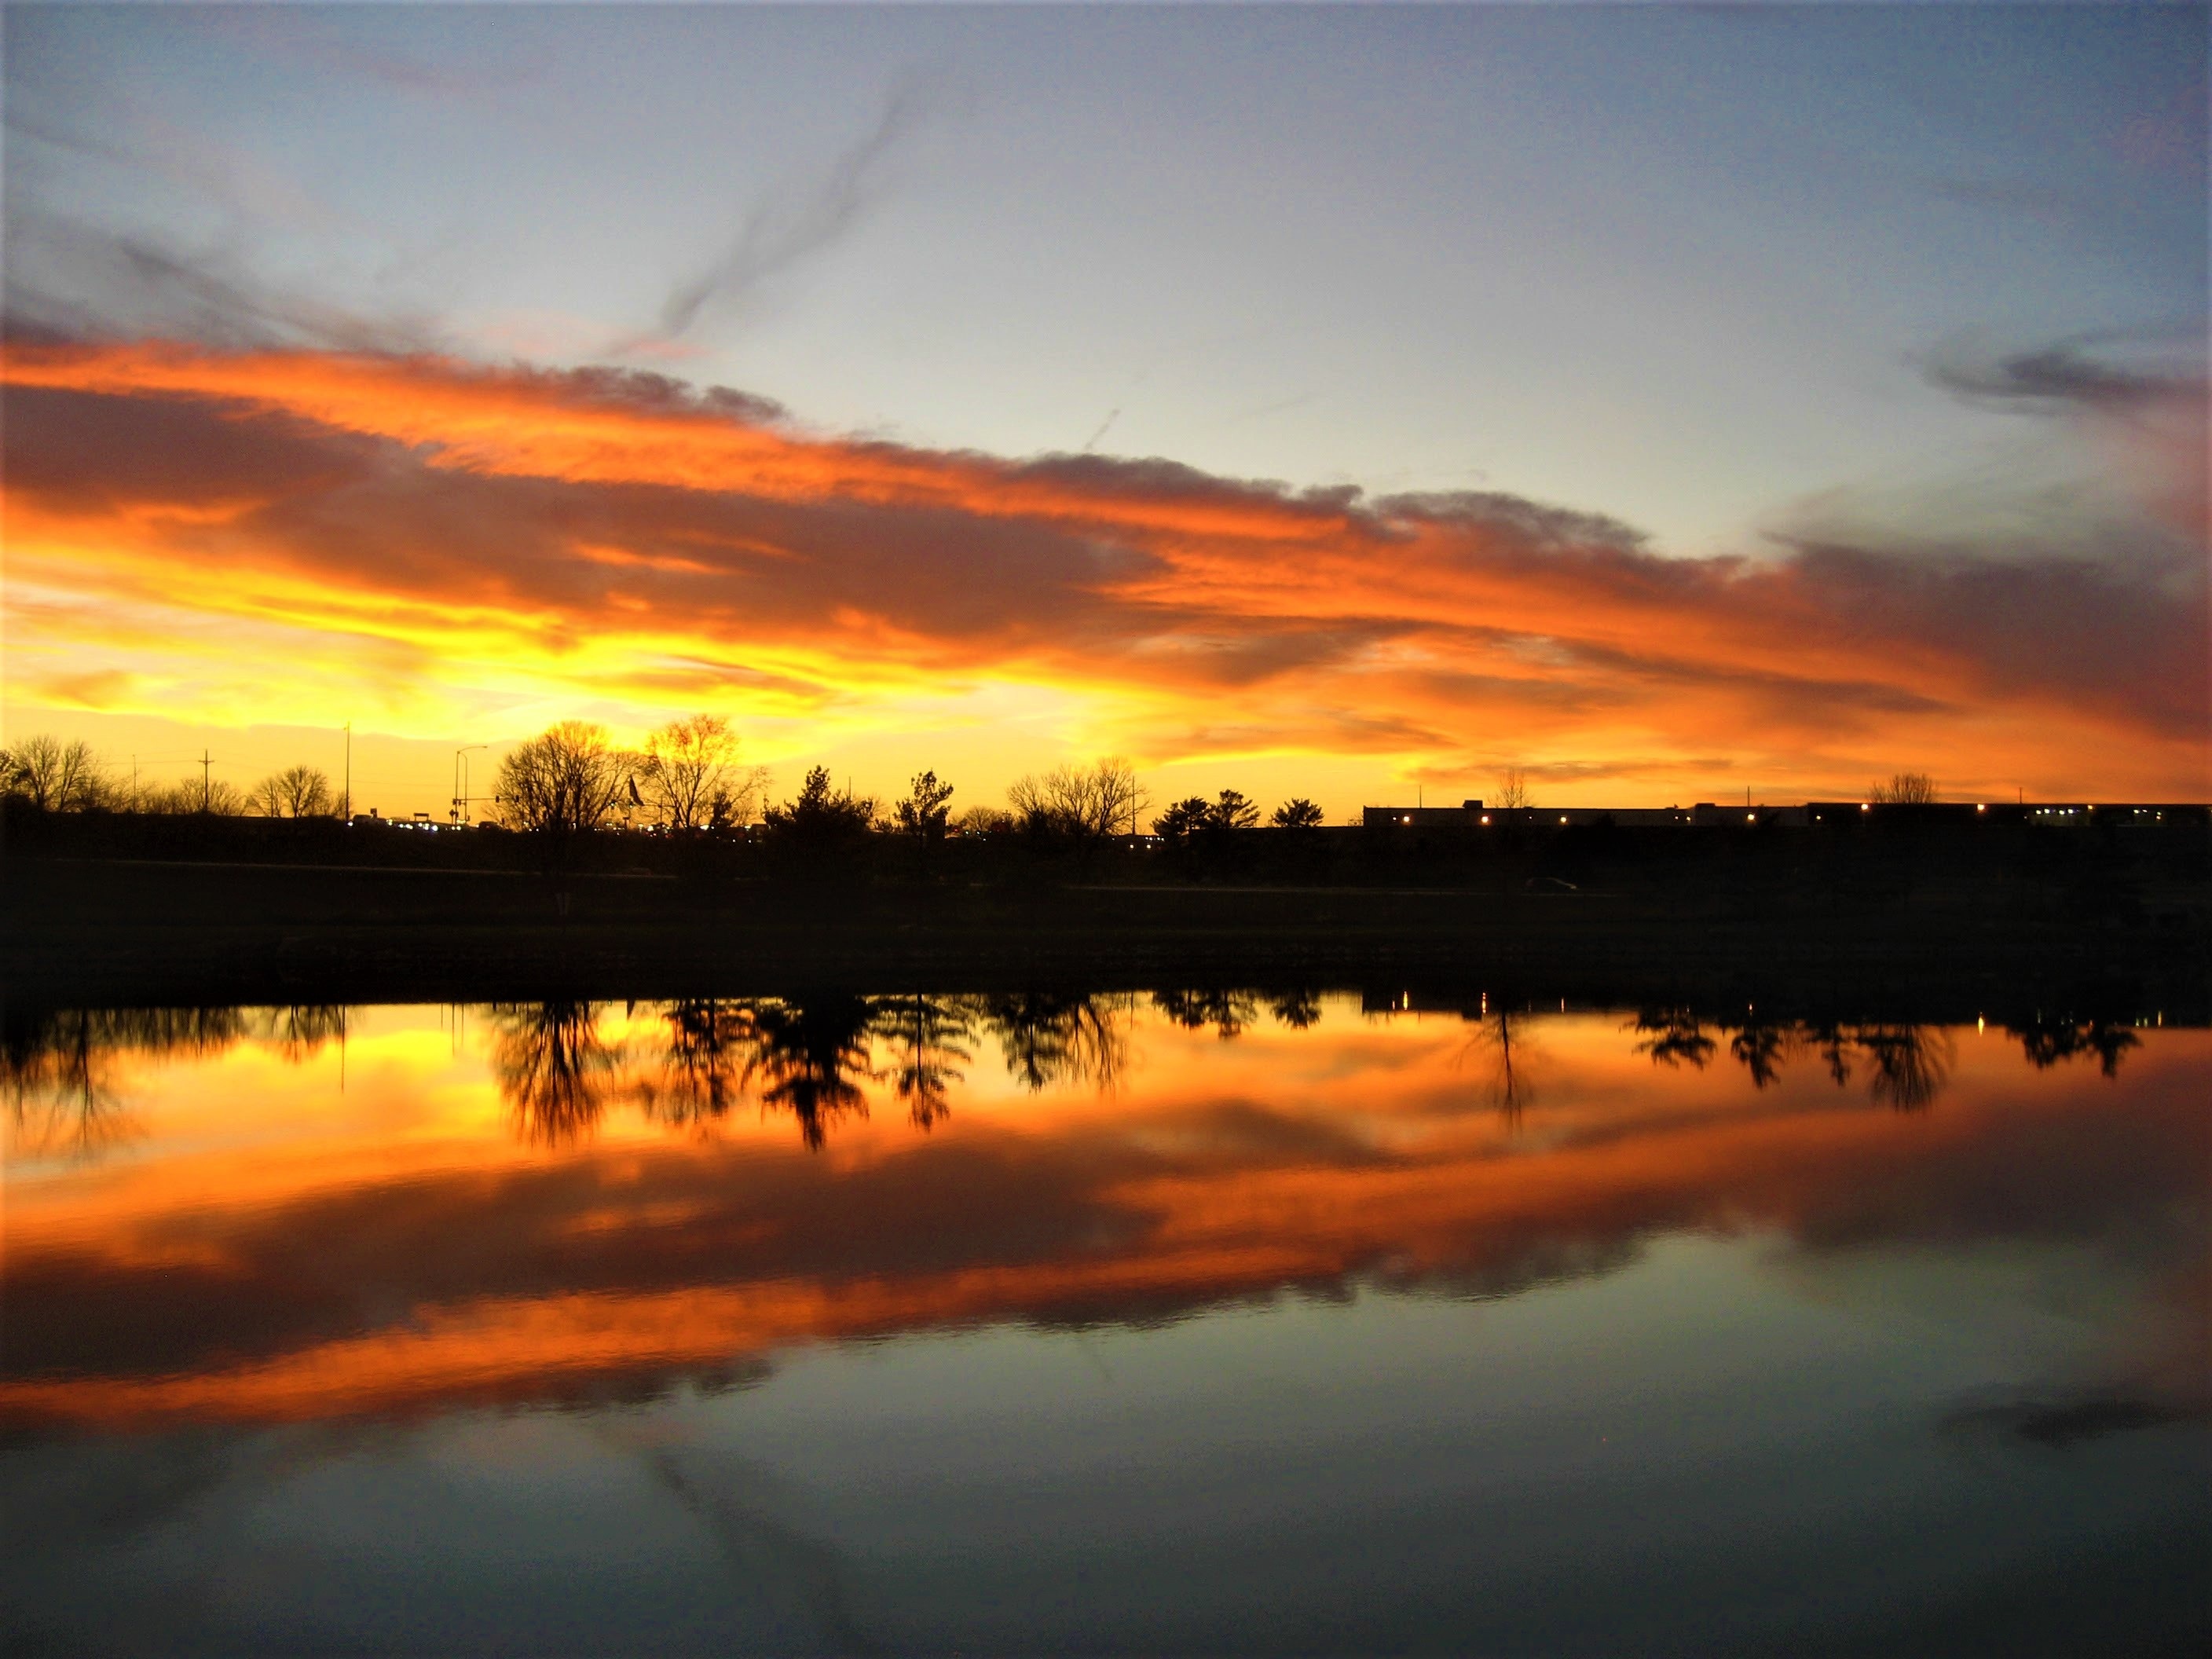 Sunset Water Reflection free image download